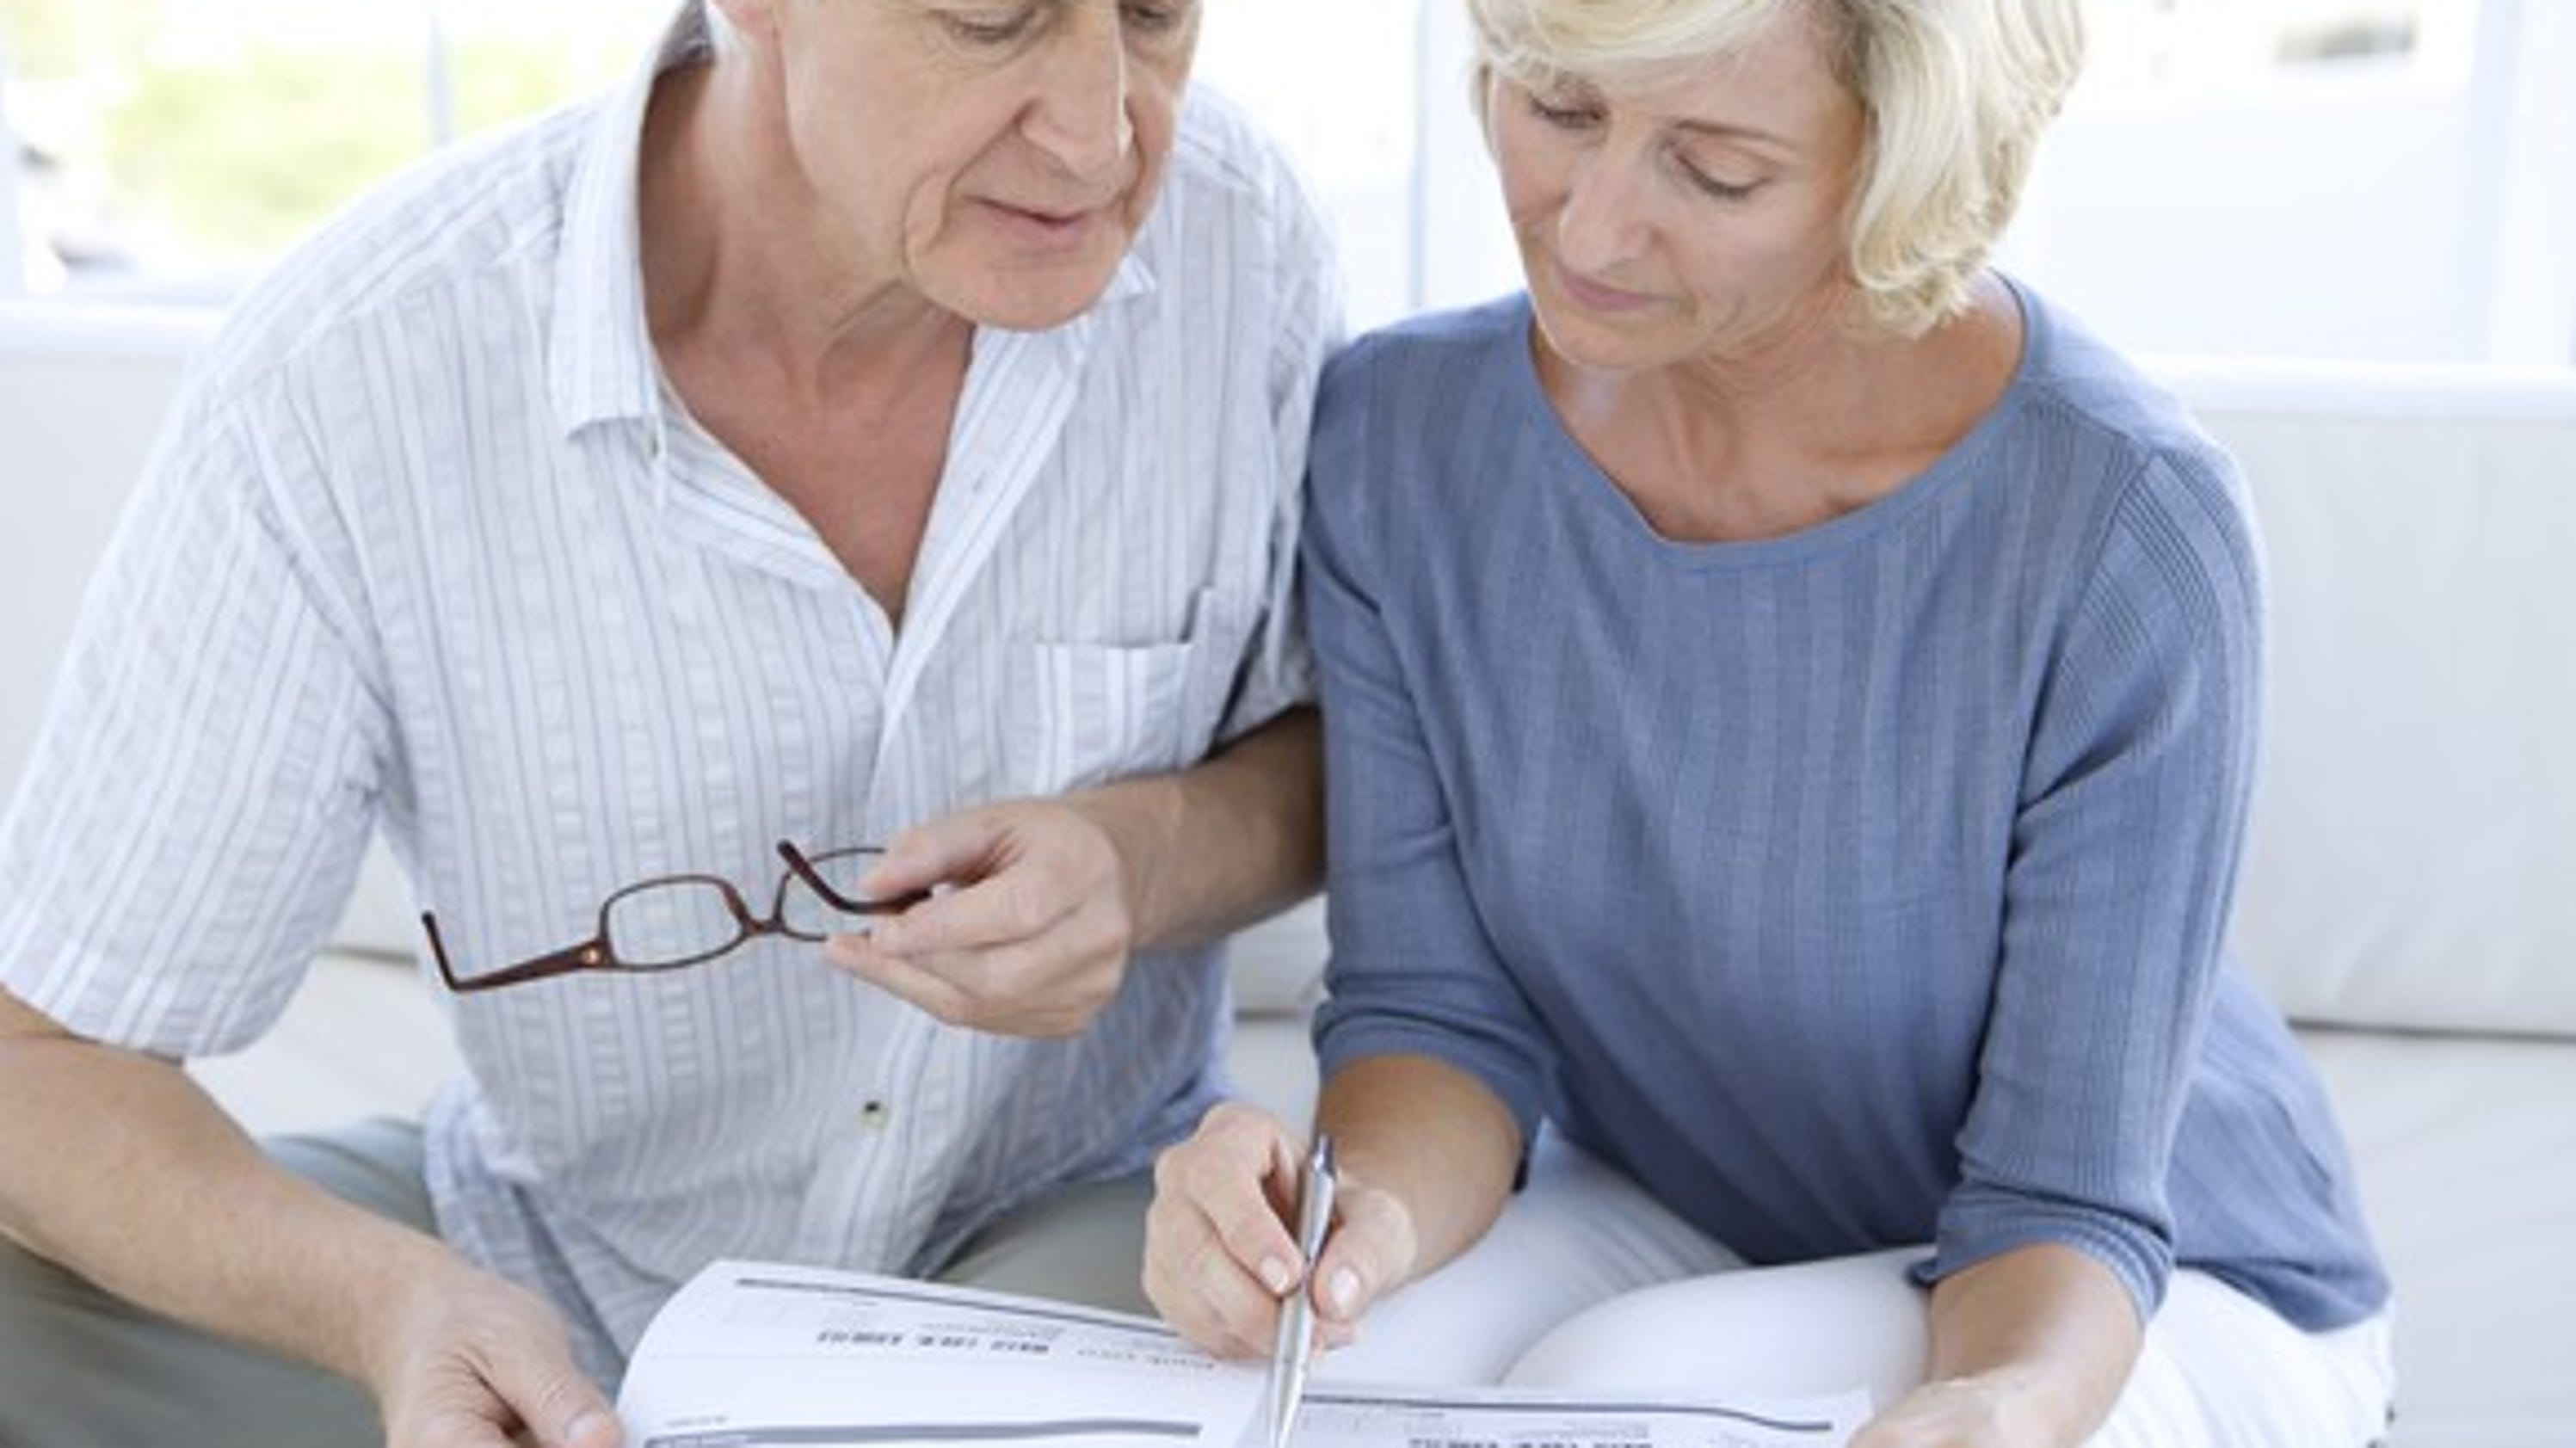 Retirement hitch: Over 75 and still deep in debt? You're in good company